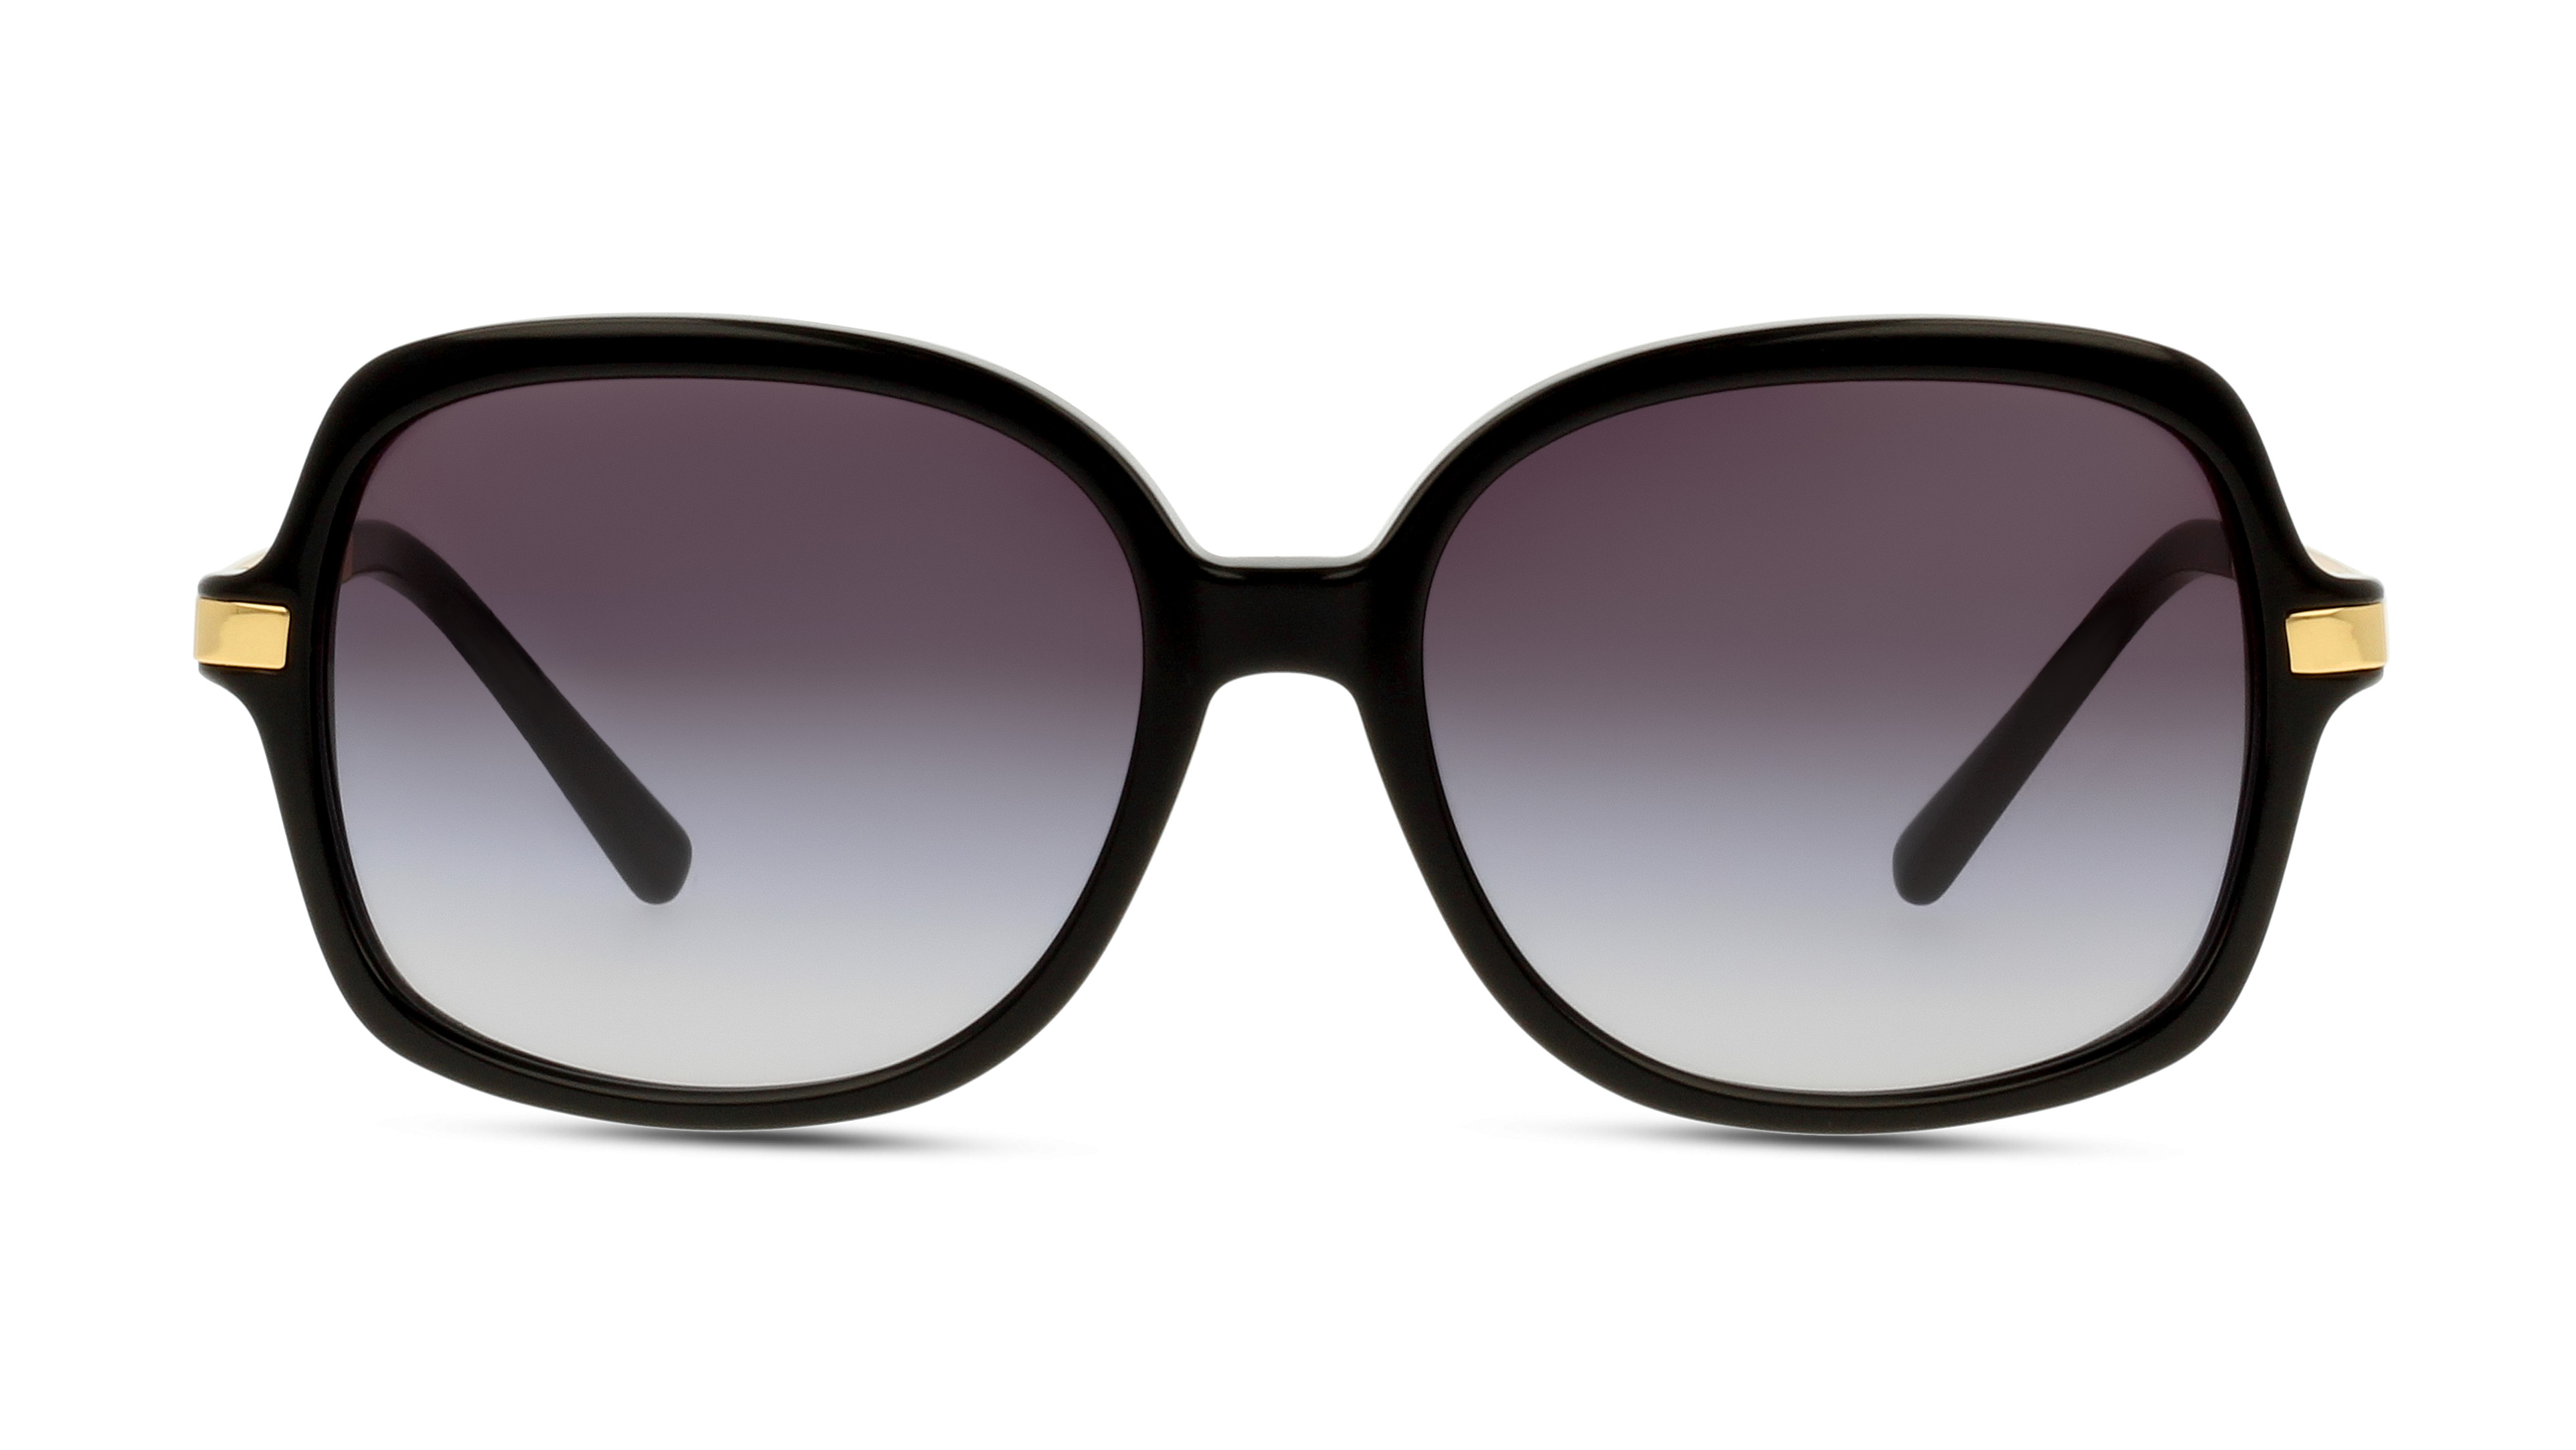 [products.image.front] Michael Kors ADRIANNA II 0MK2024 316011 Sonnenbrille